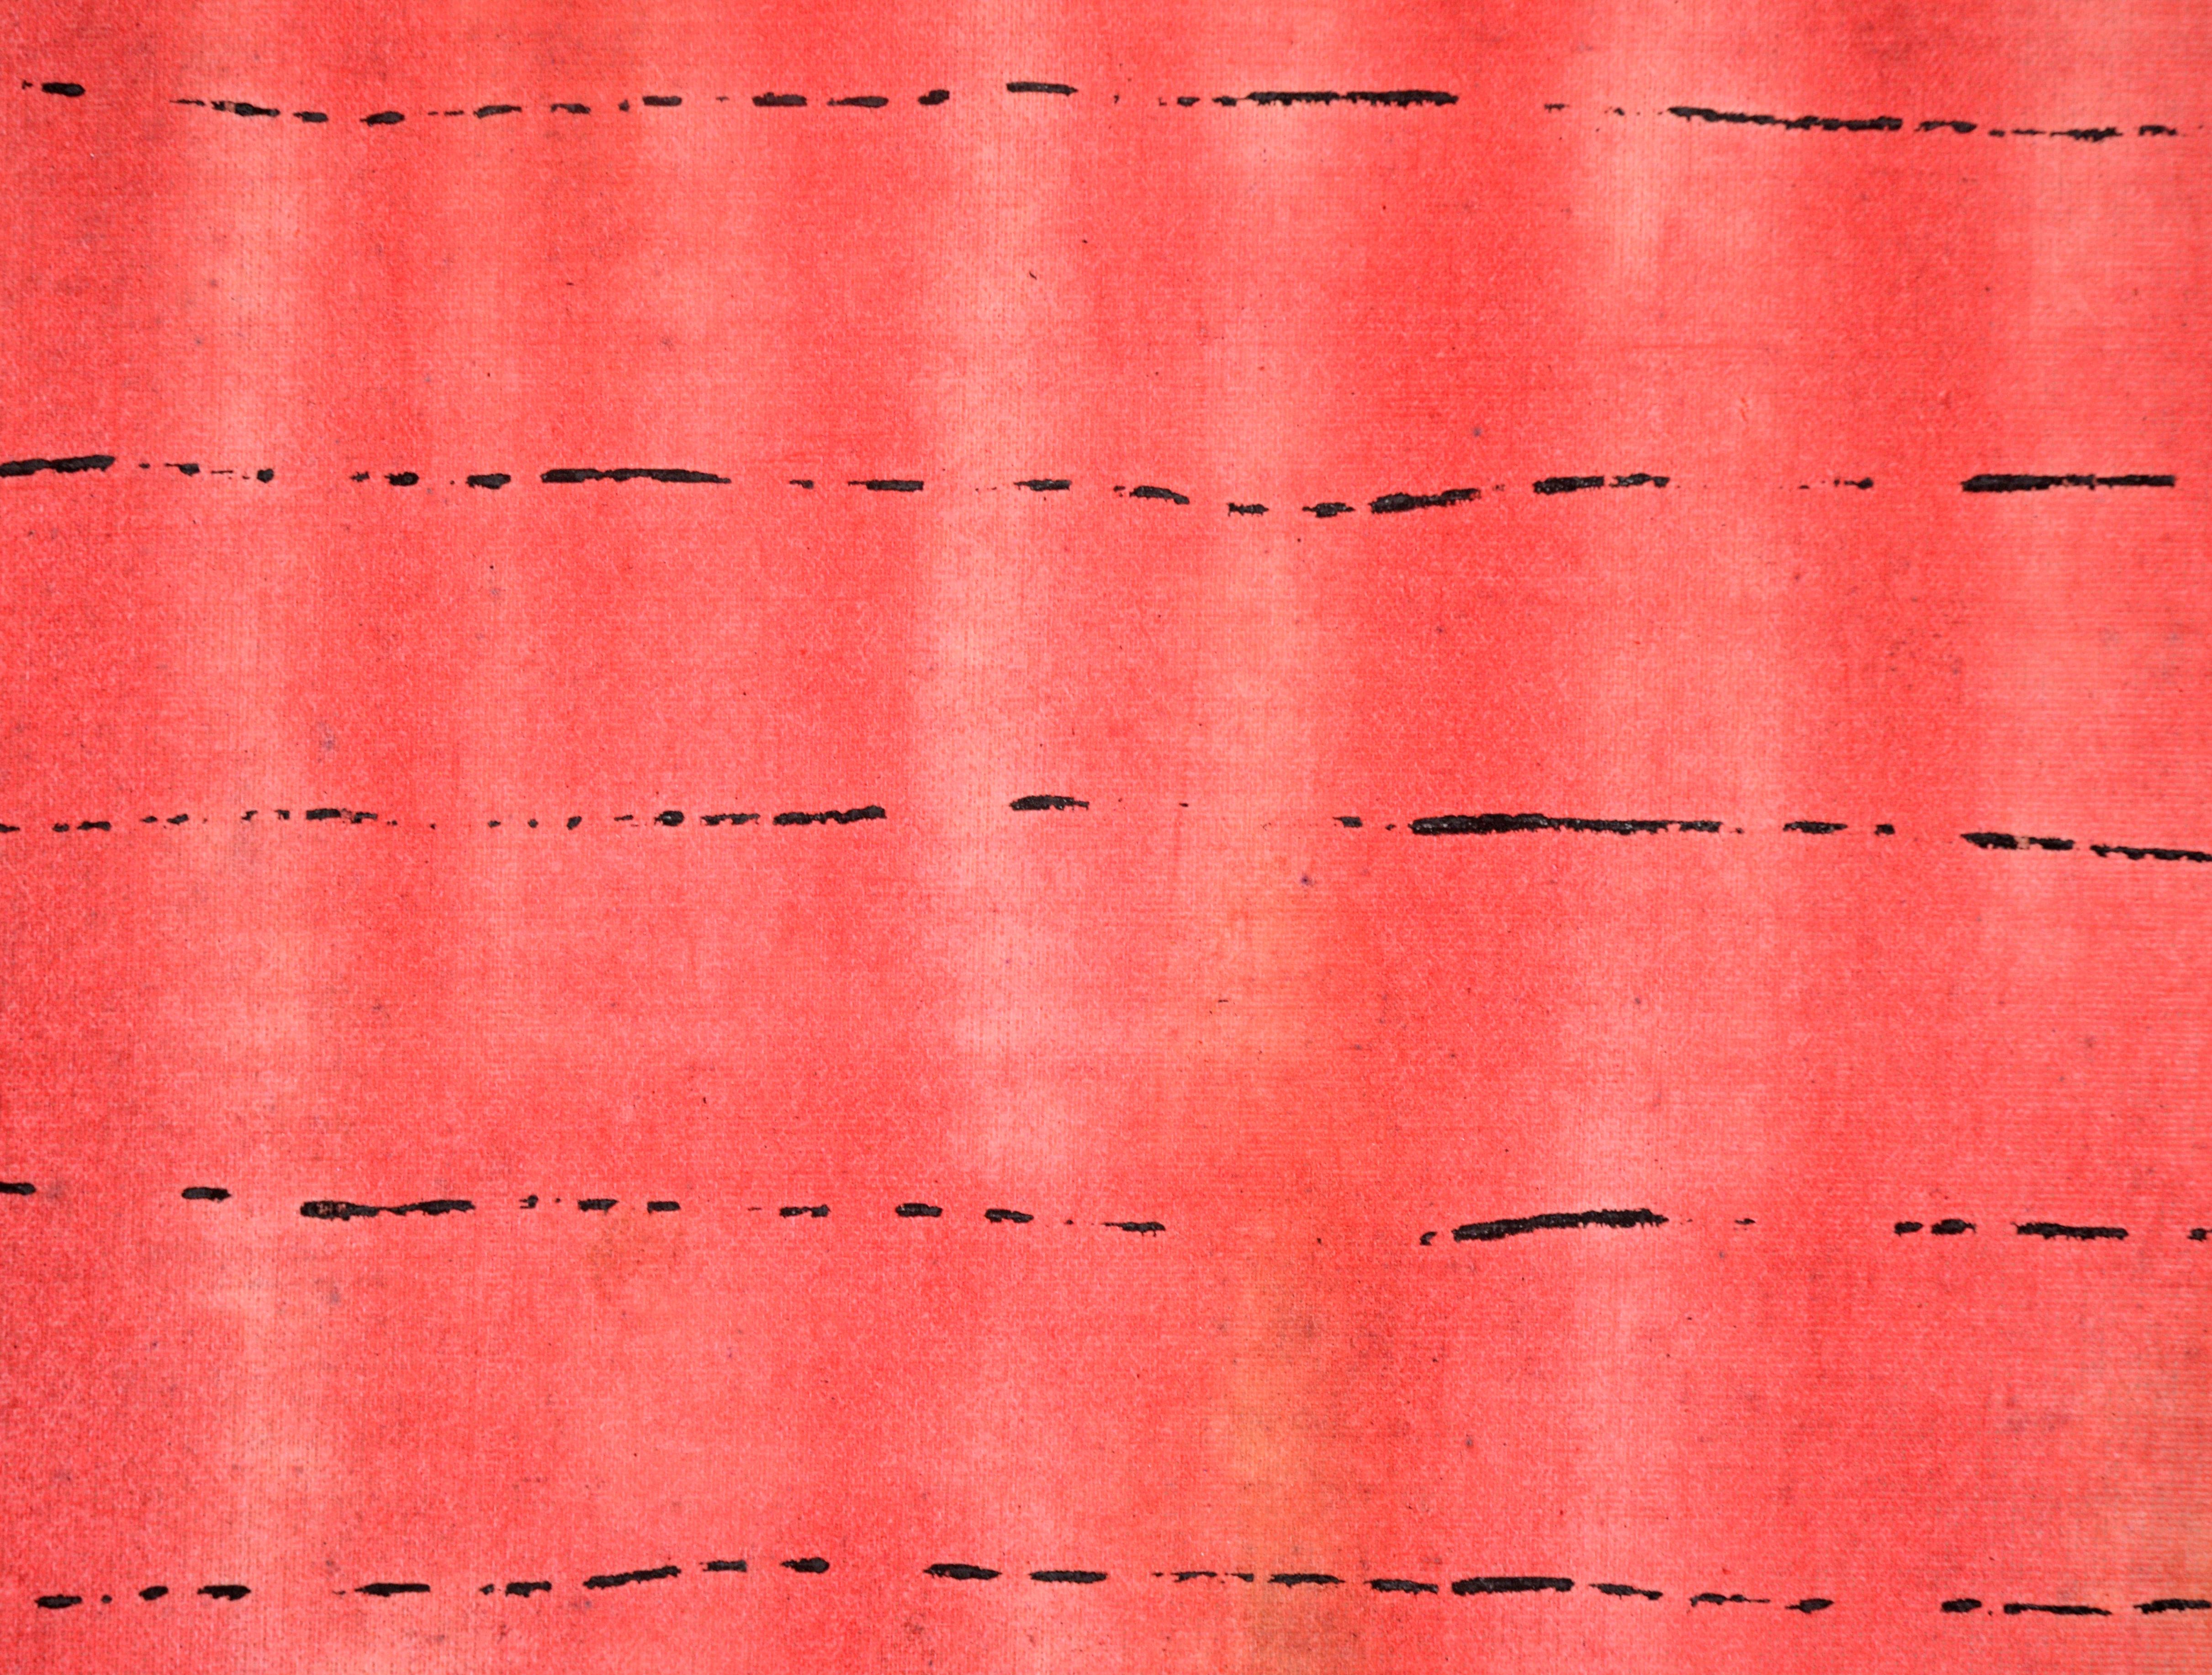 Black Lines Across a Red Field - Abstract Composition on Starched Linen 3